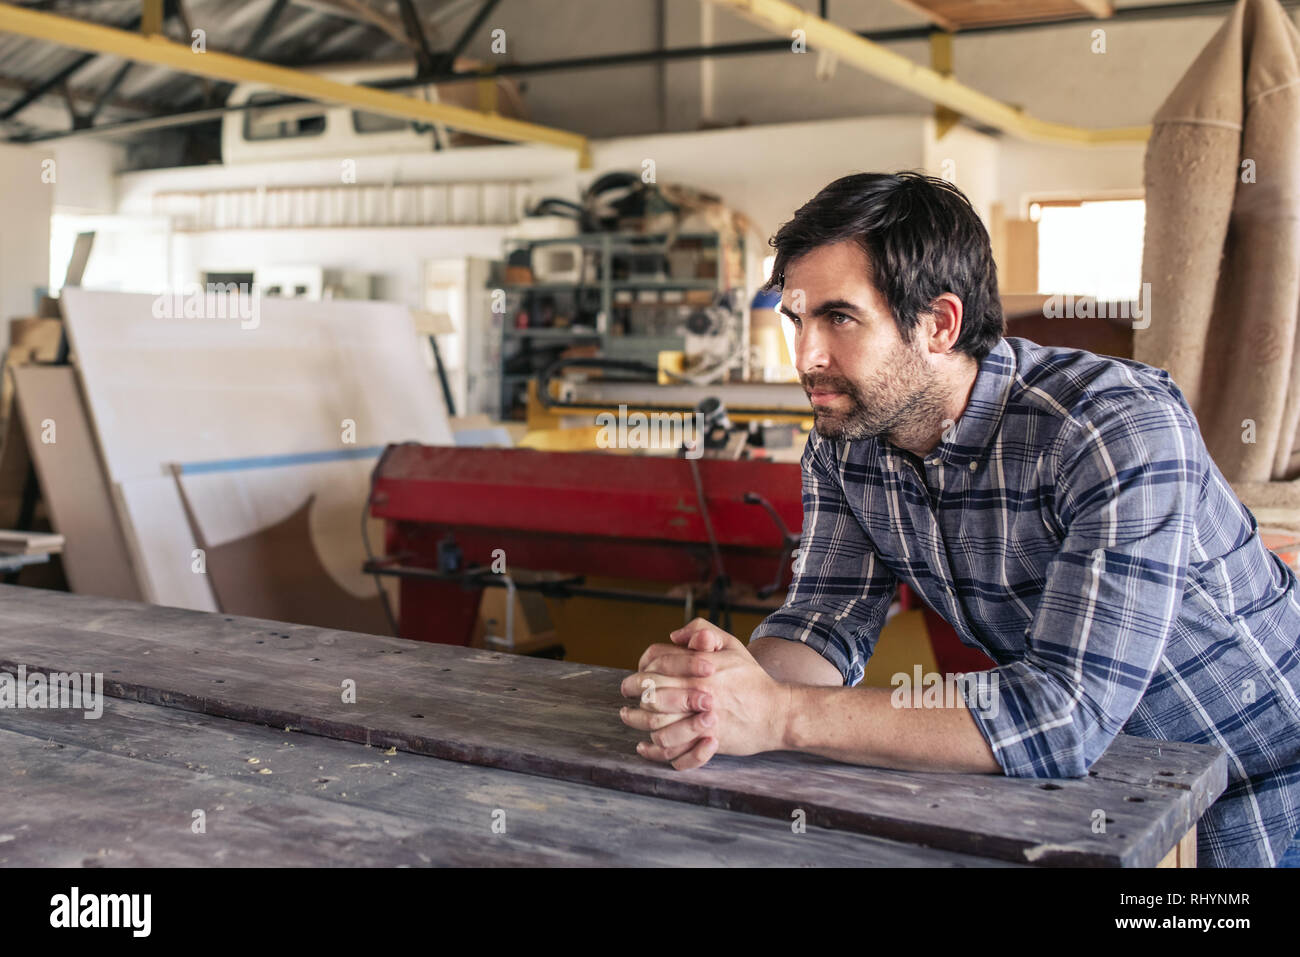 Craftsman leaning on a workshop bench deep in thought Stock Photo